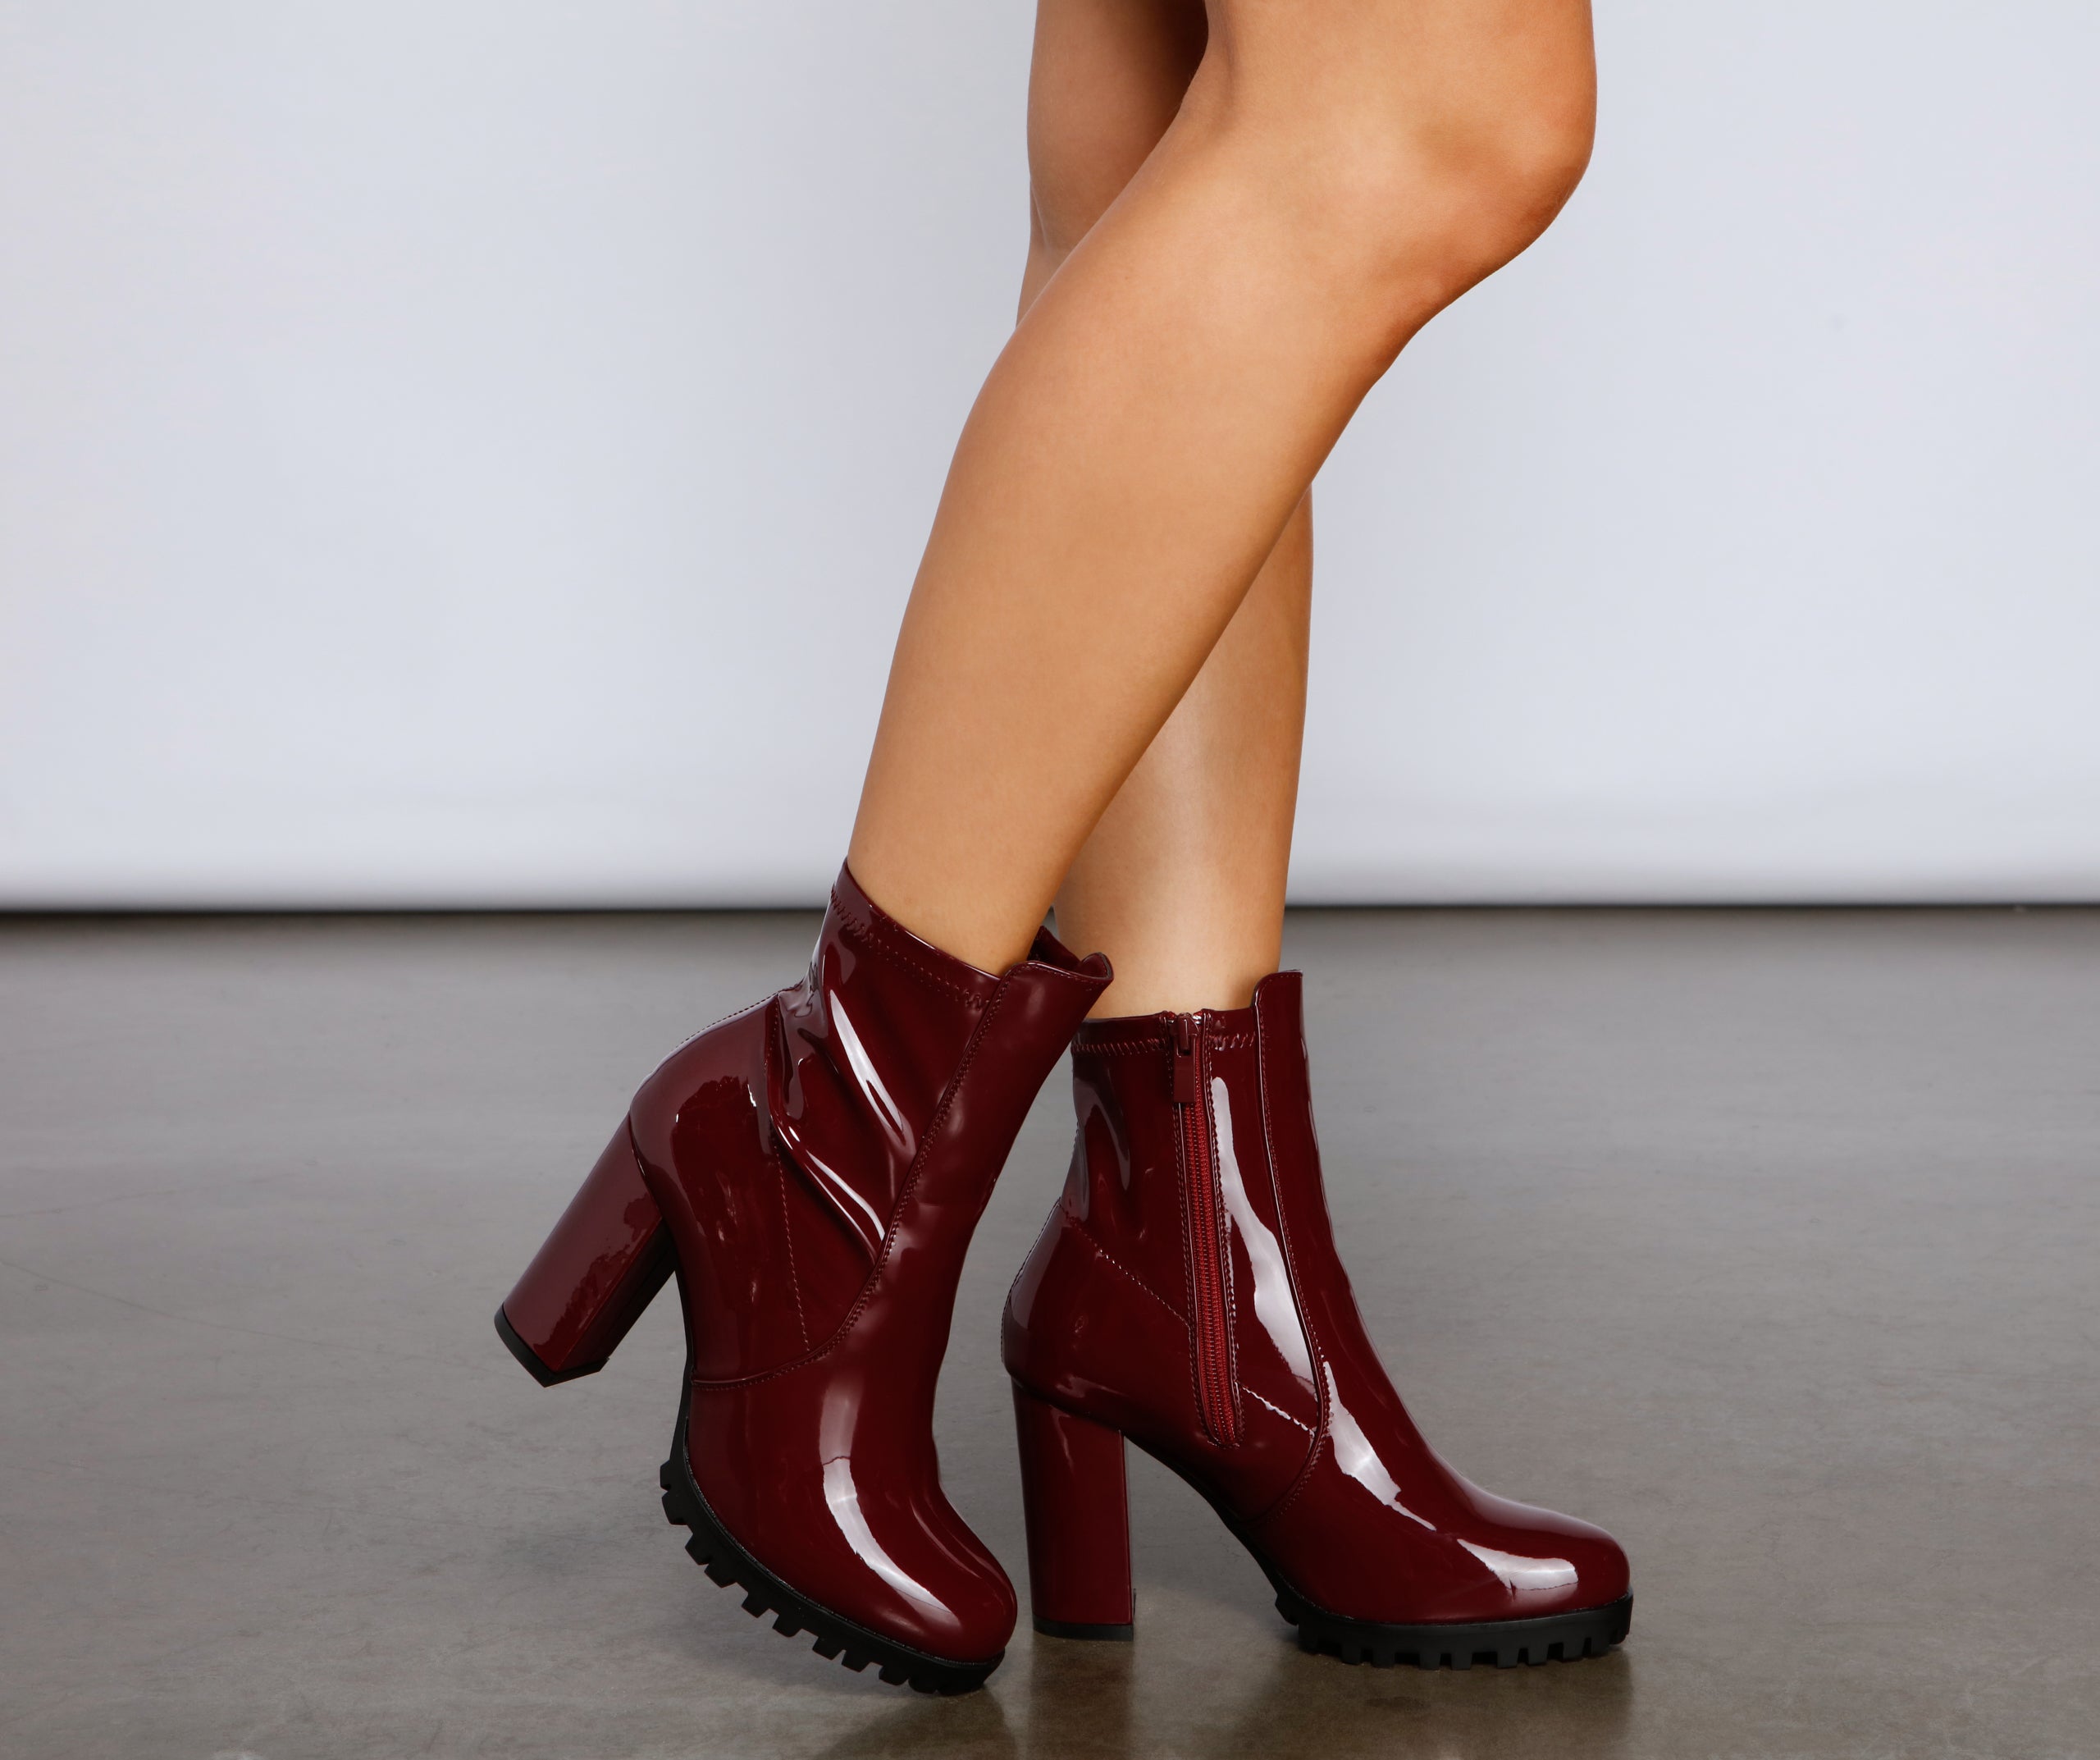 Wild Gal Patent Faux Patent Leather Combat Boots